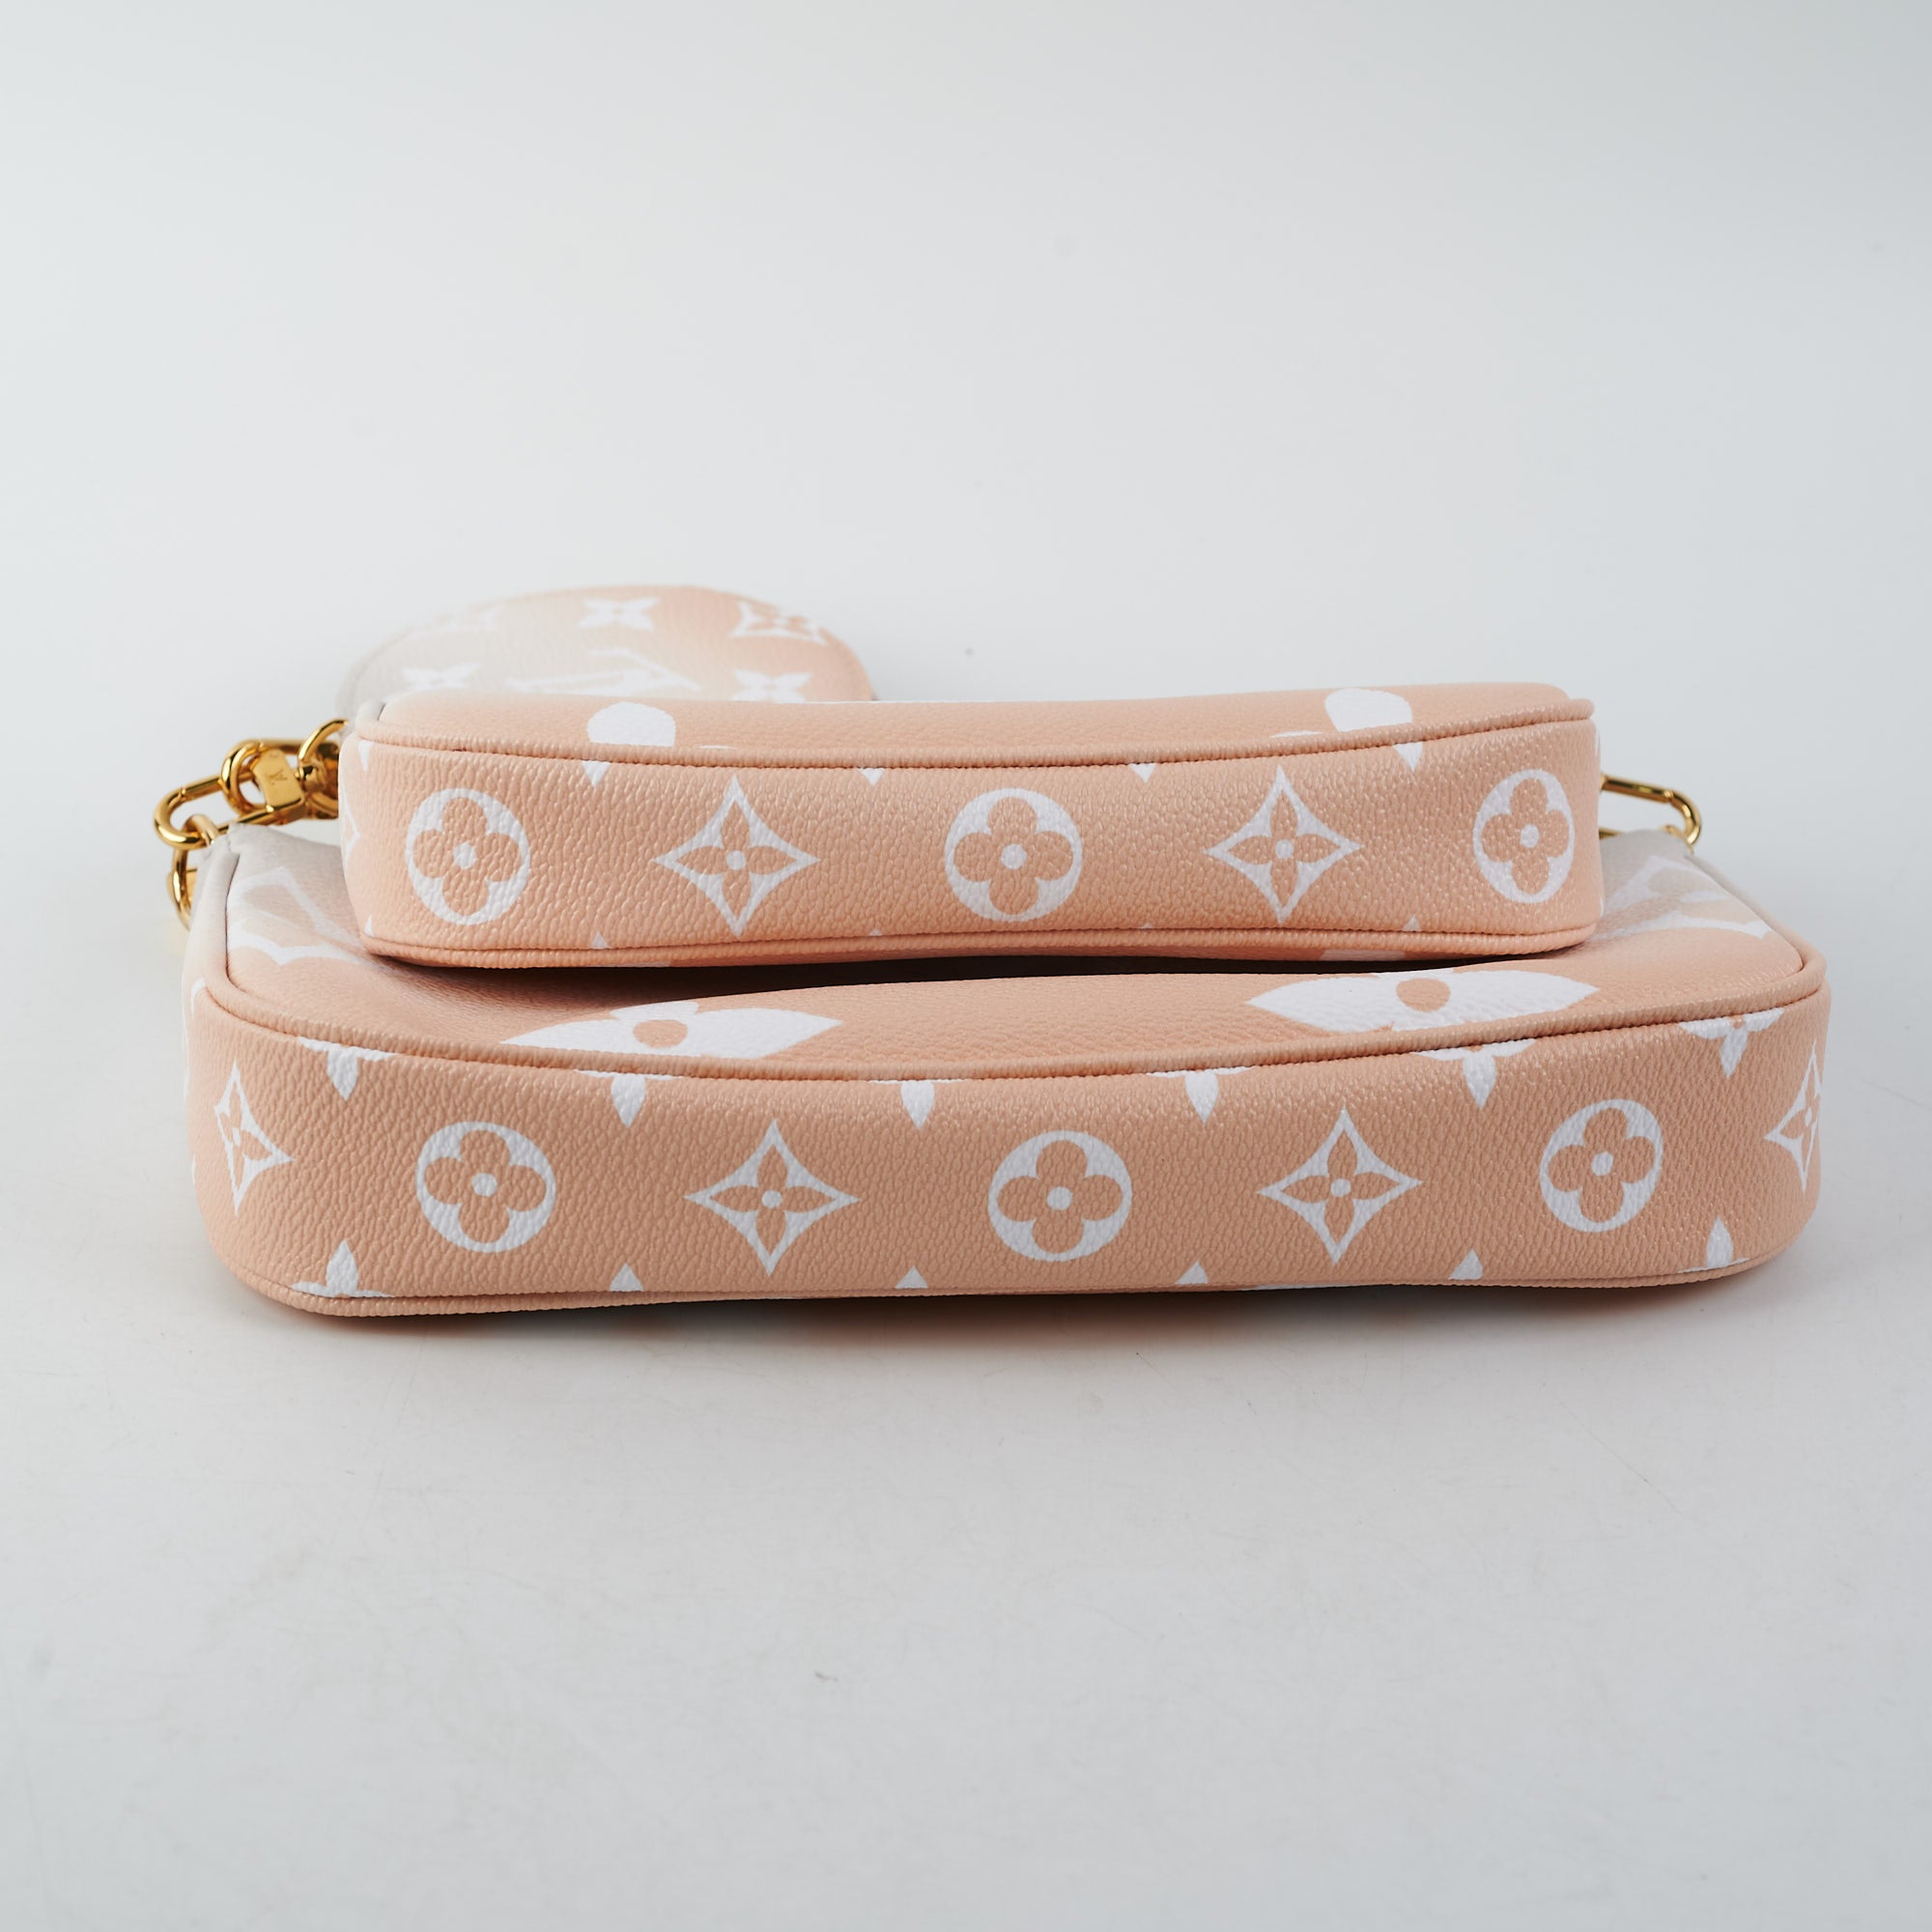 Louis Vuitton MultiPochette By the Pool Ombre Peach, New in Box WA001